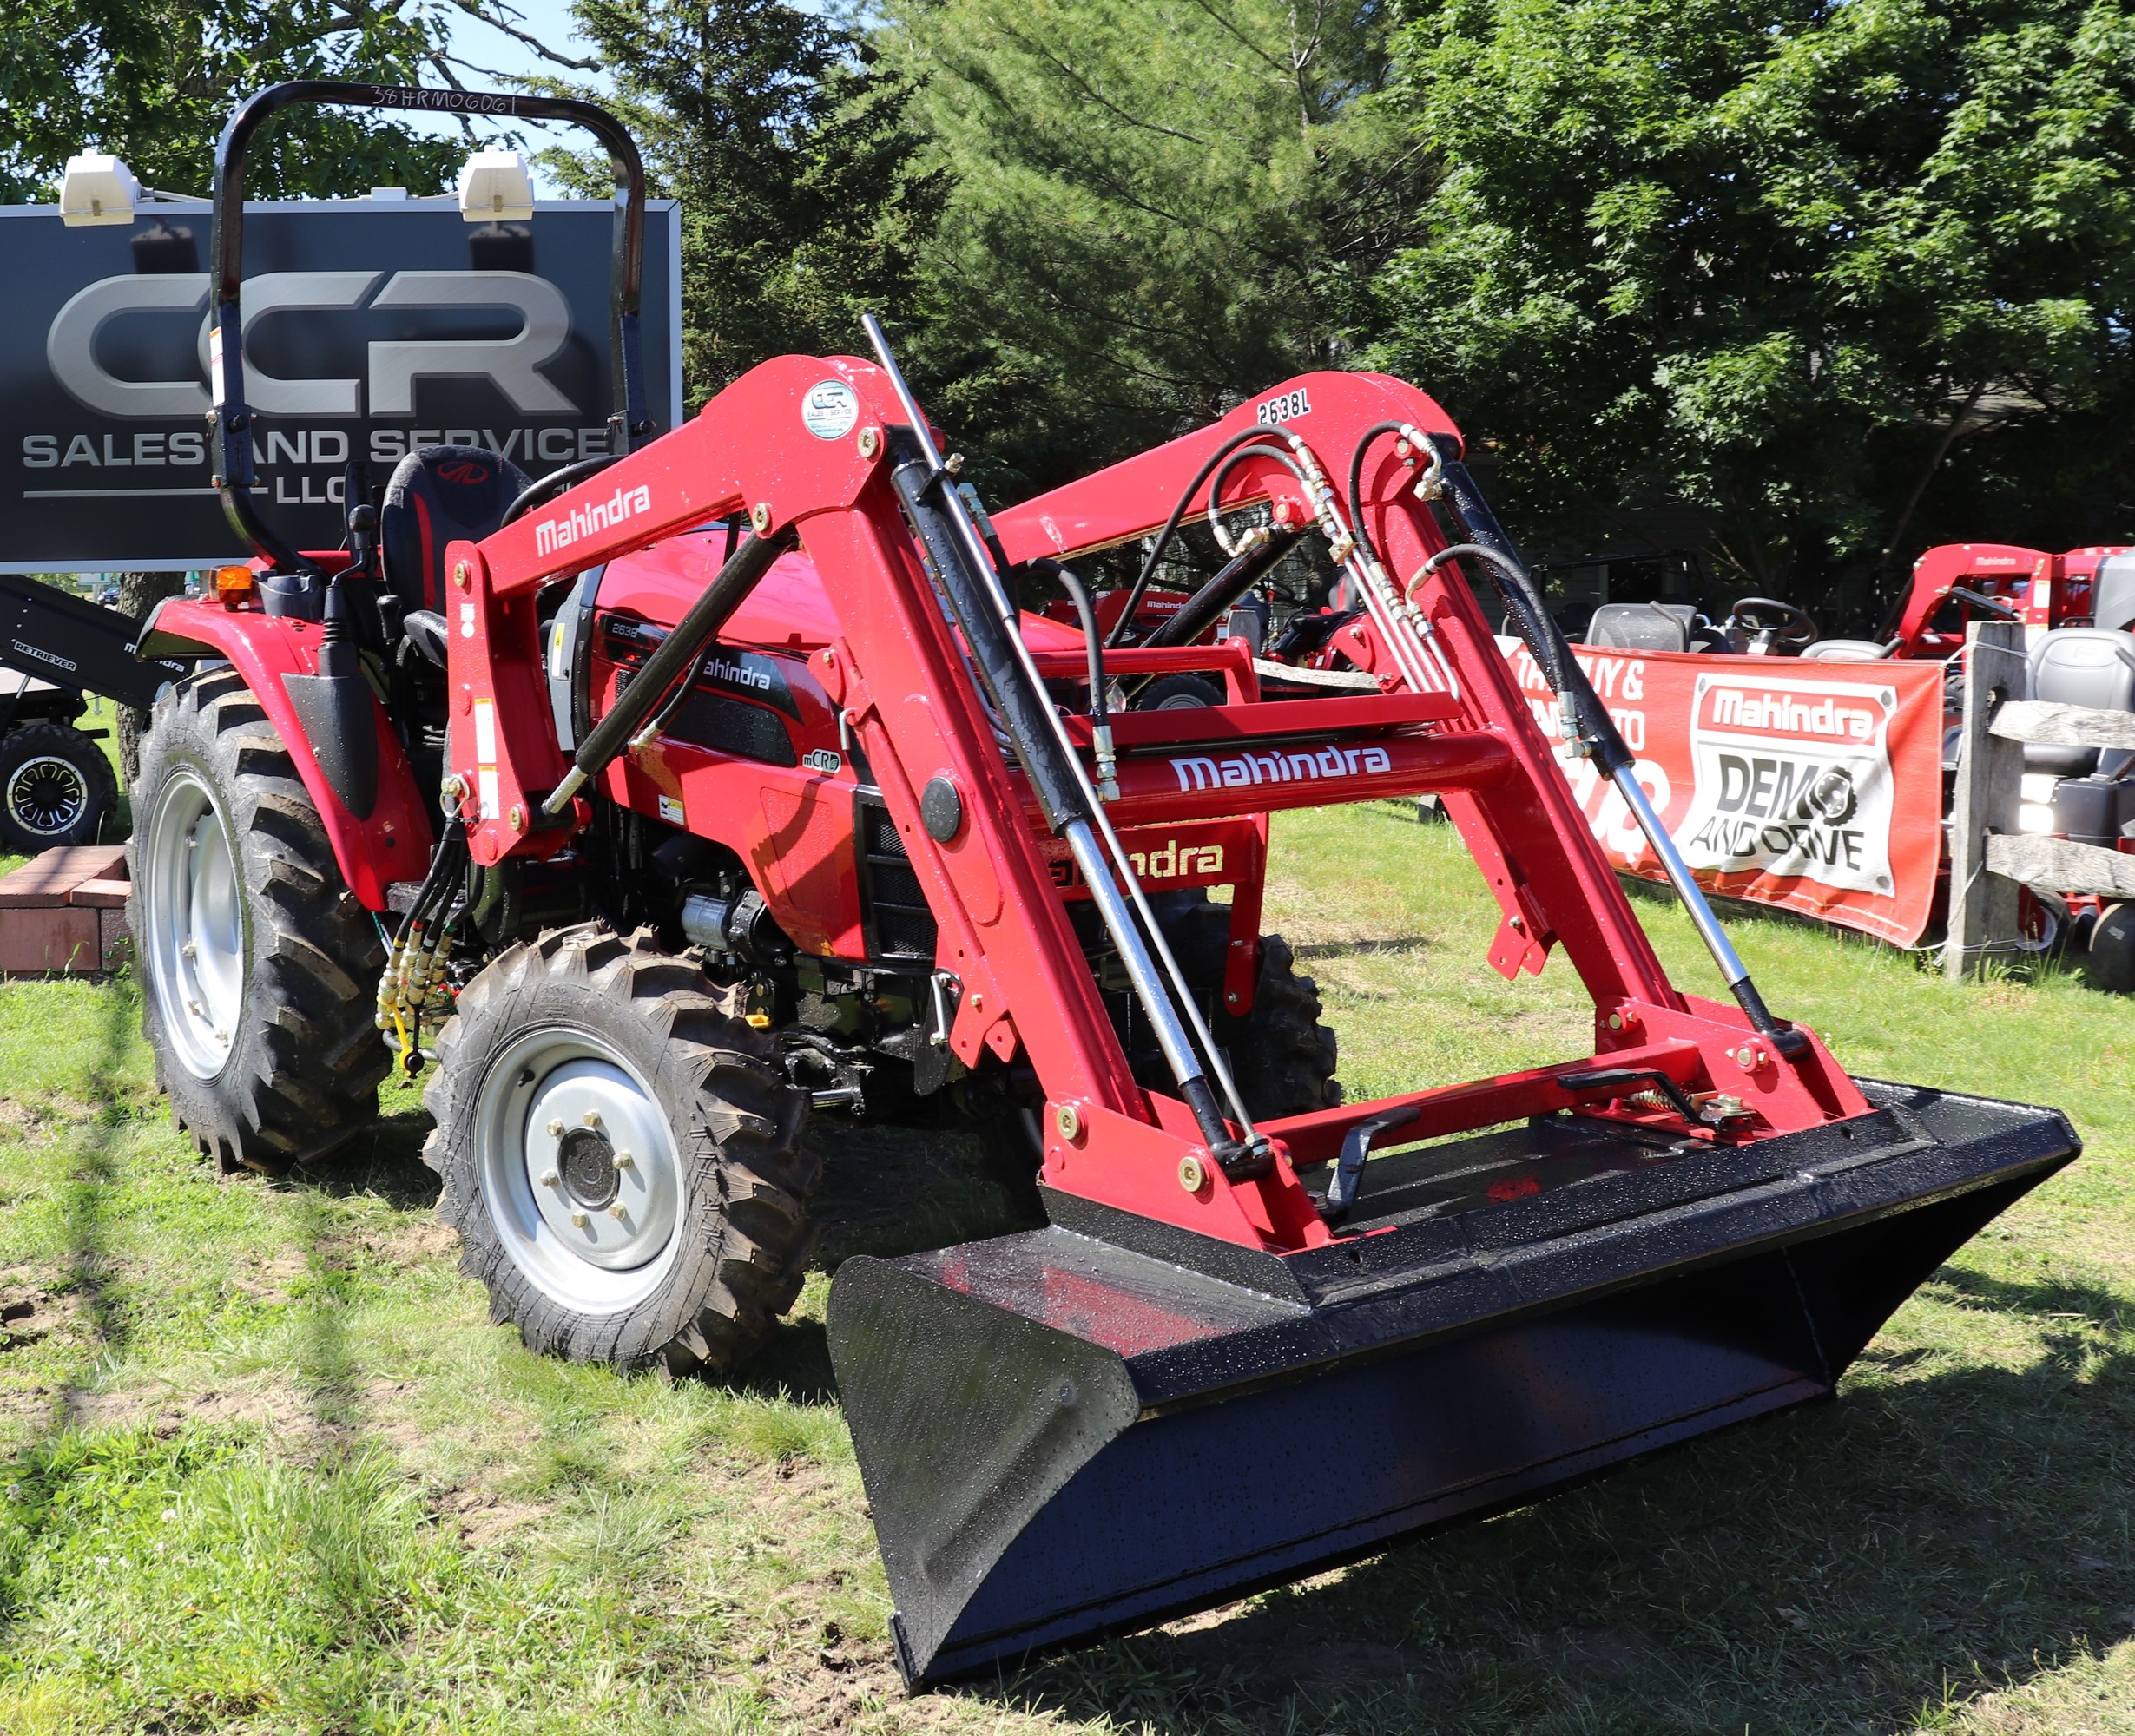 2019 Mahindra Arjun 605 for sale in CCR Sales and Service, Essex, Vermont